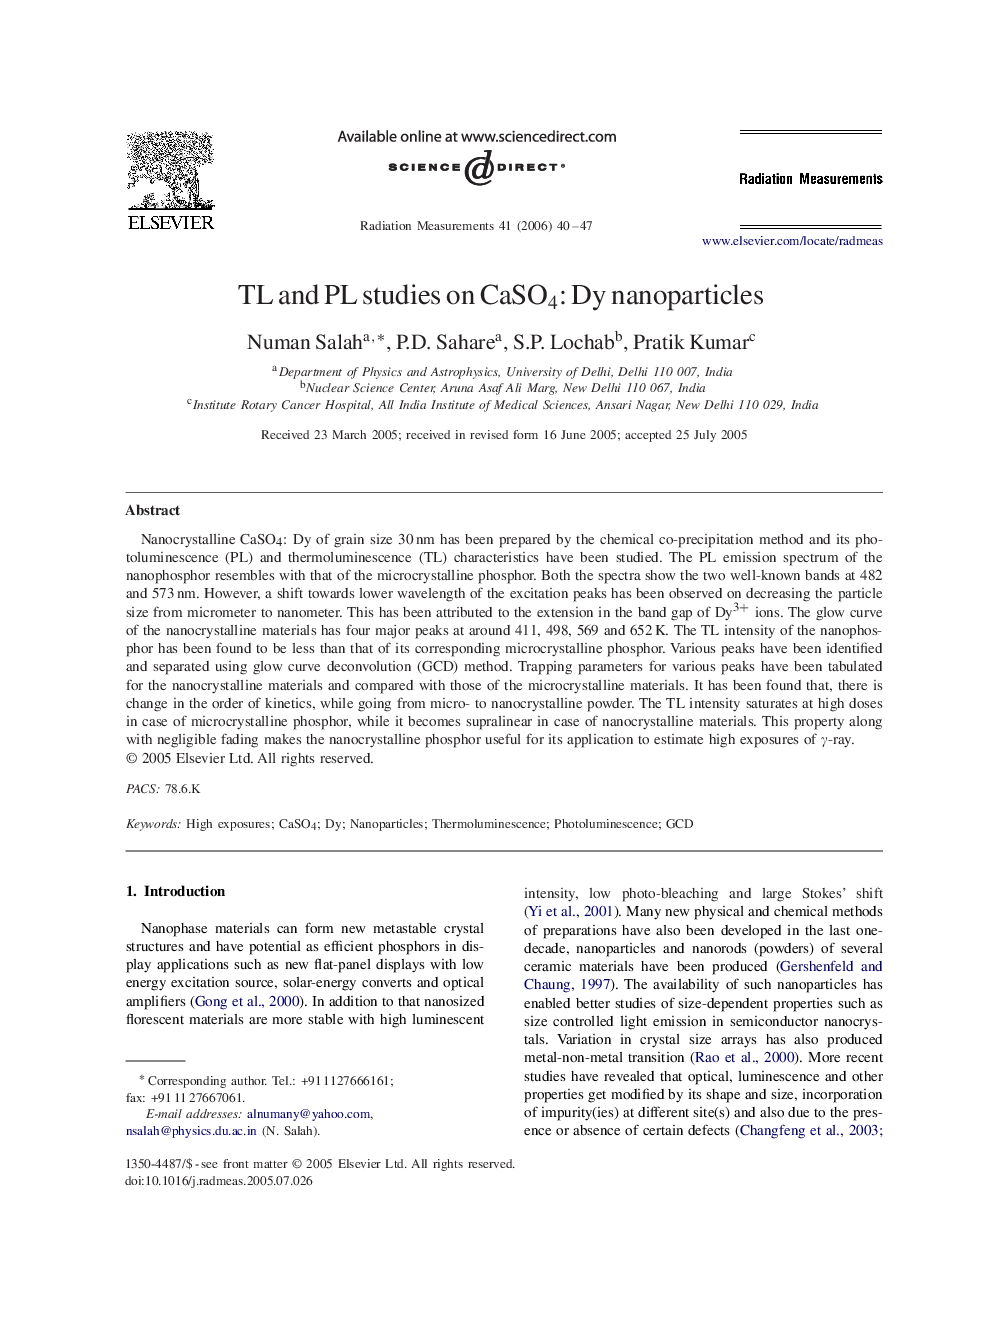 TL and PL studies on CaSO4CaSO4: Dy nanoparticles